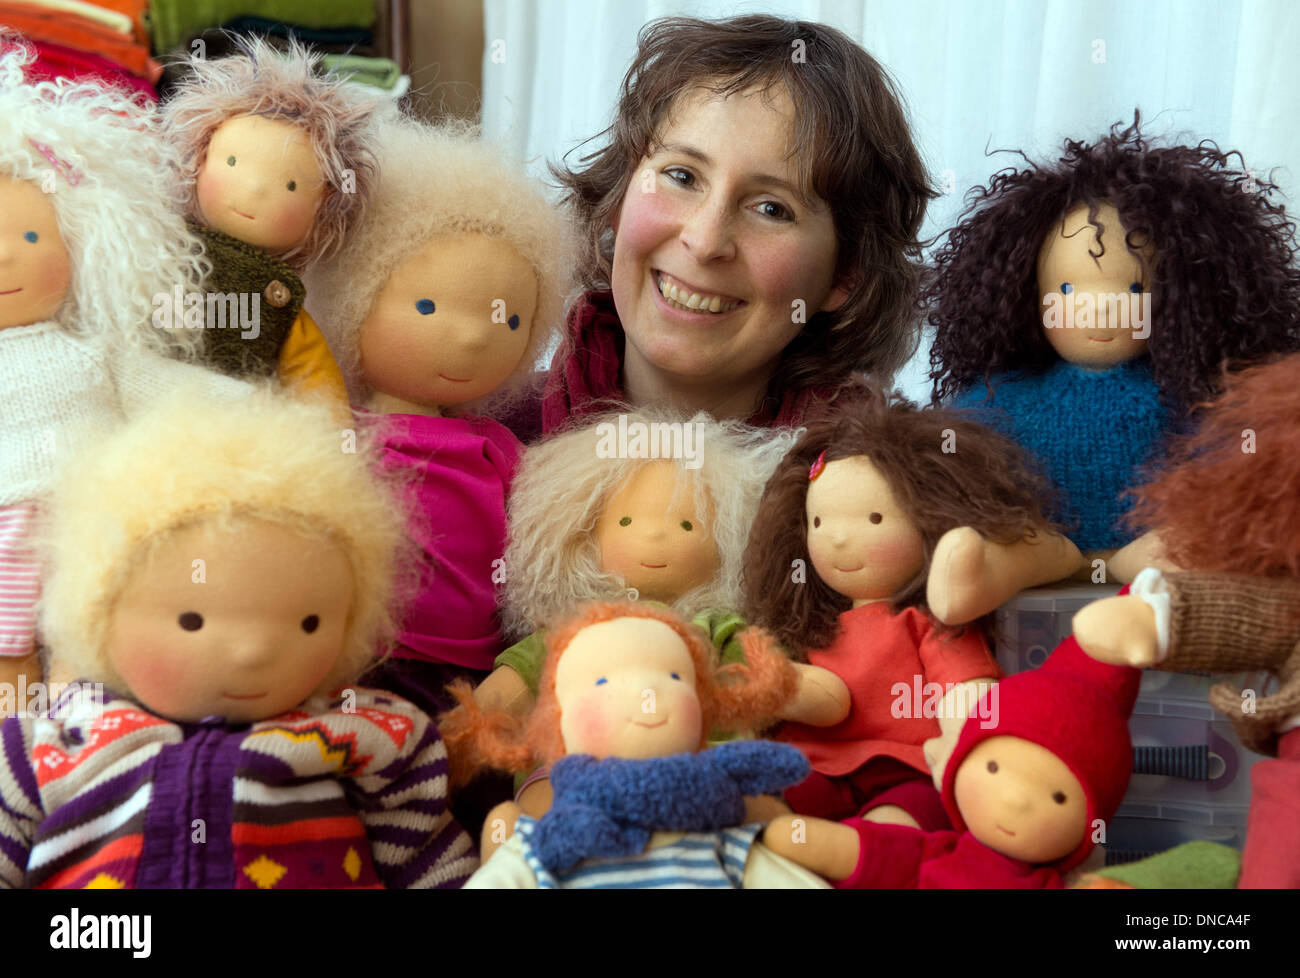 Doll Maker High Resolution Stock Photography and Images - Alamy